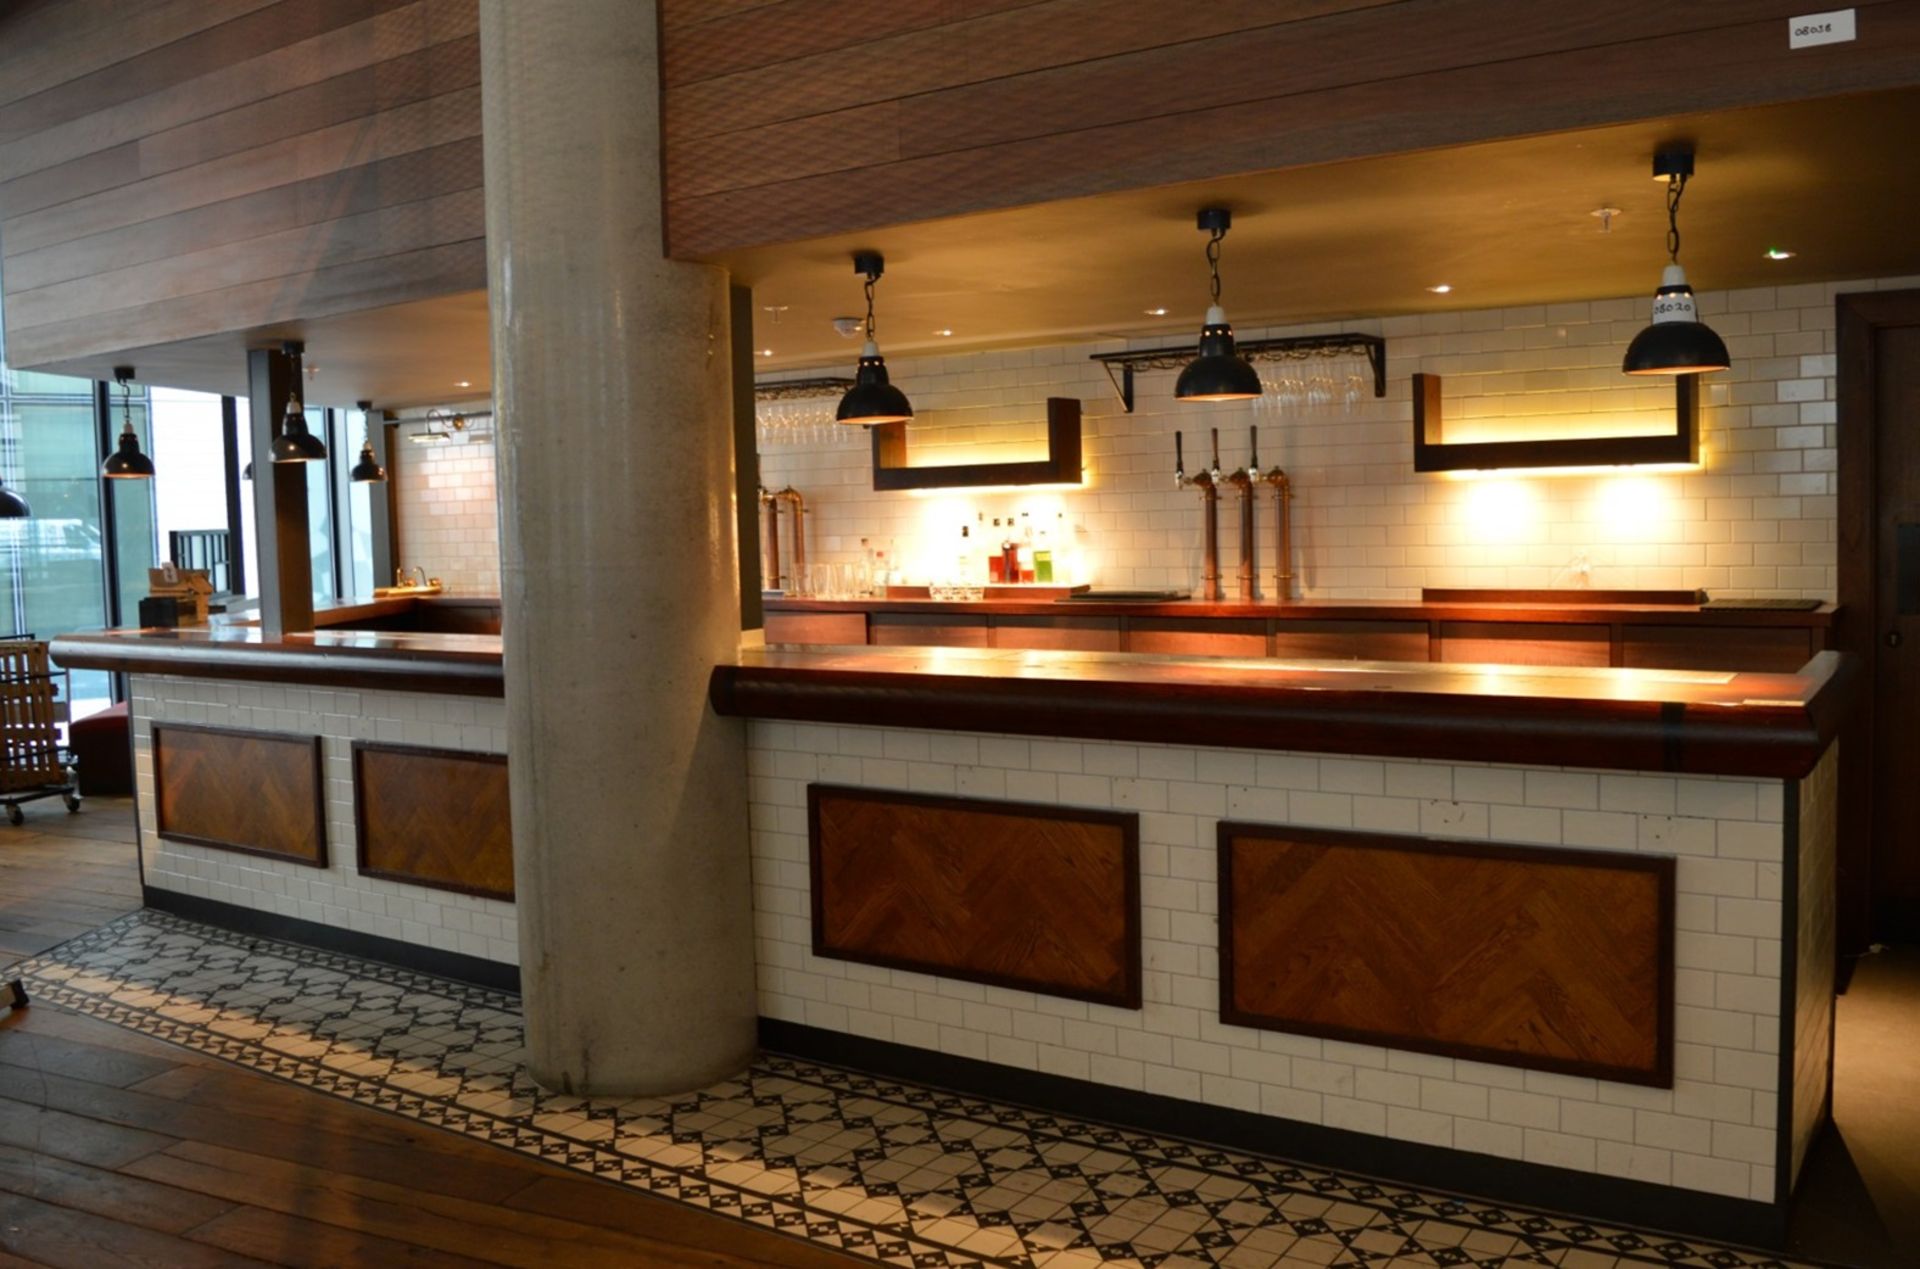 1 x Large Pub / Restuarant Bar With Tiled Front and Framed Parquet Flooring Design - Also Includes - Image 20 of 25